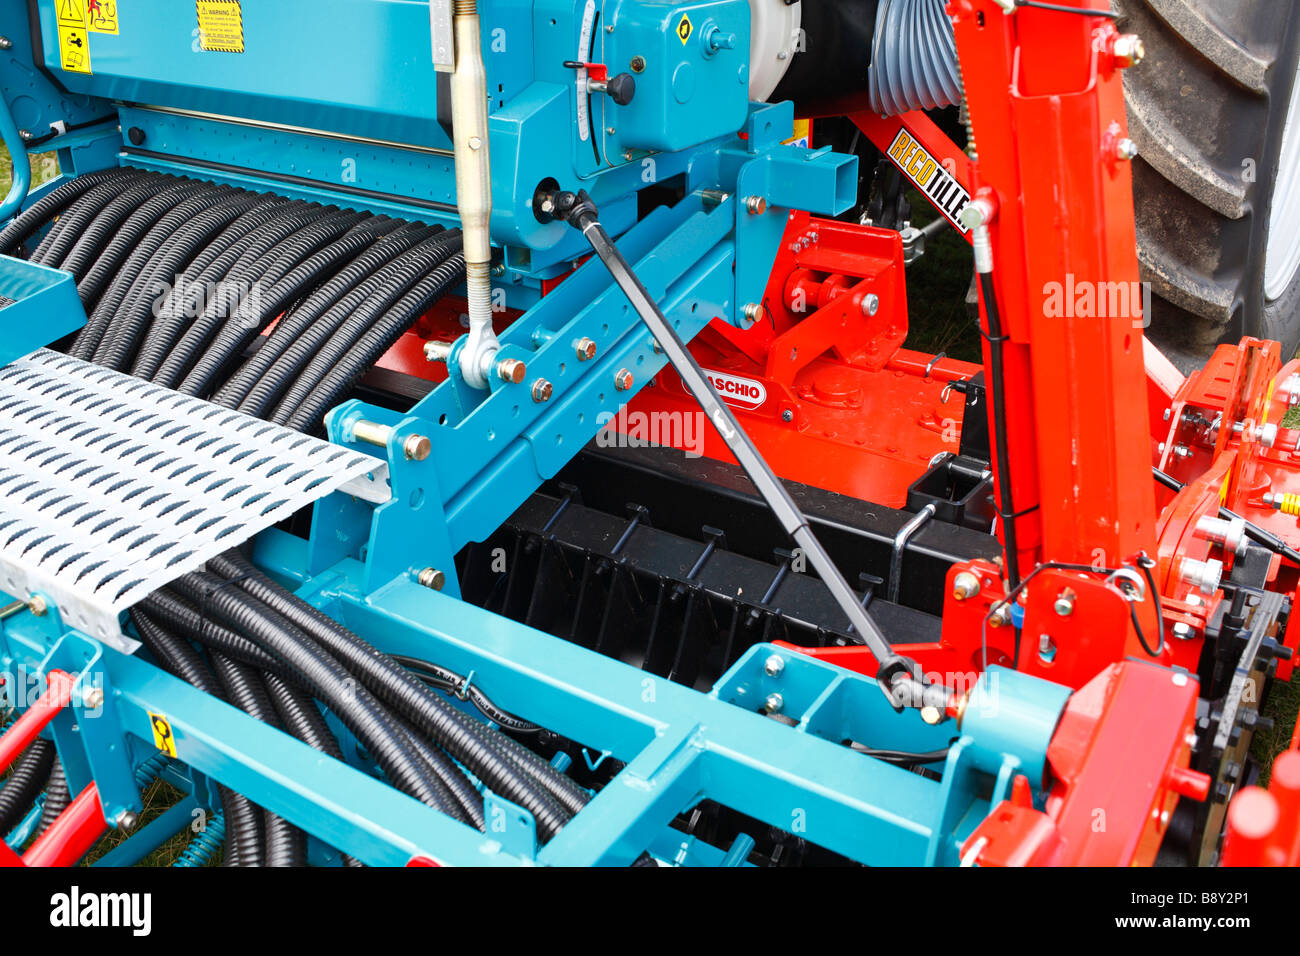 Farm Machinery. Part of a power harrow cultivator/seed drill combination. New equipment at an agricultural show. Stock Photo